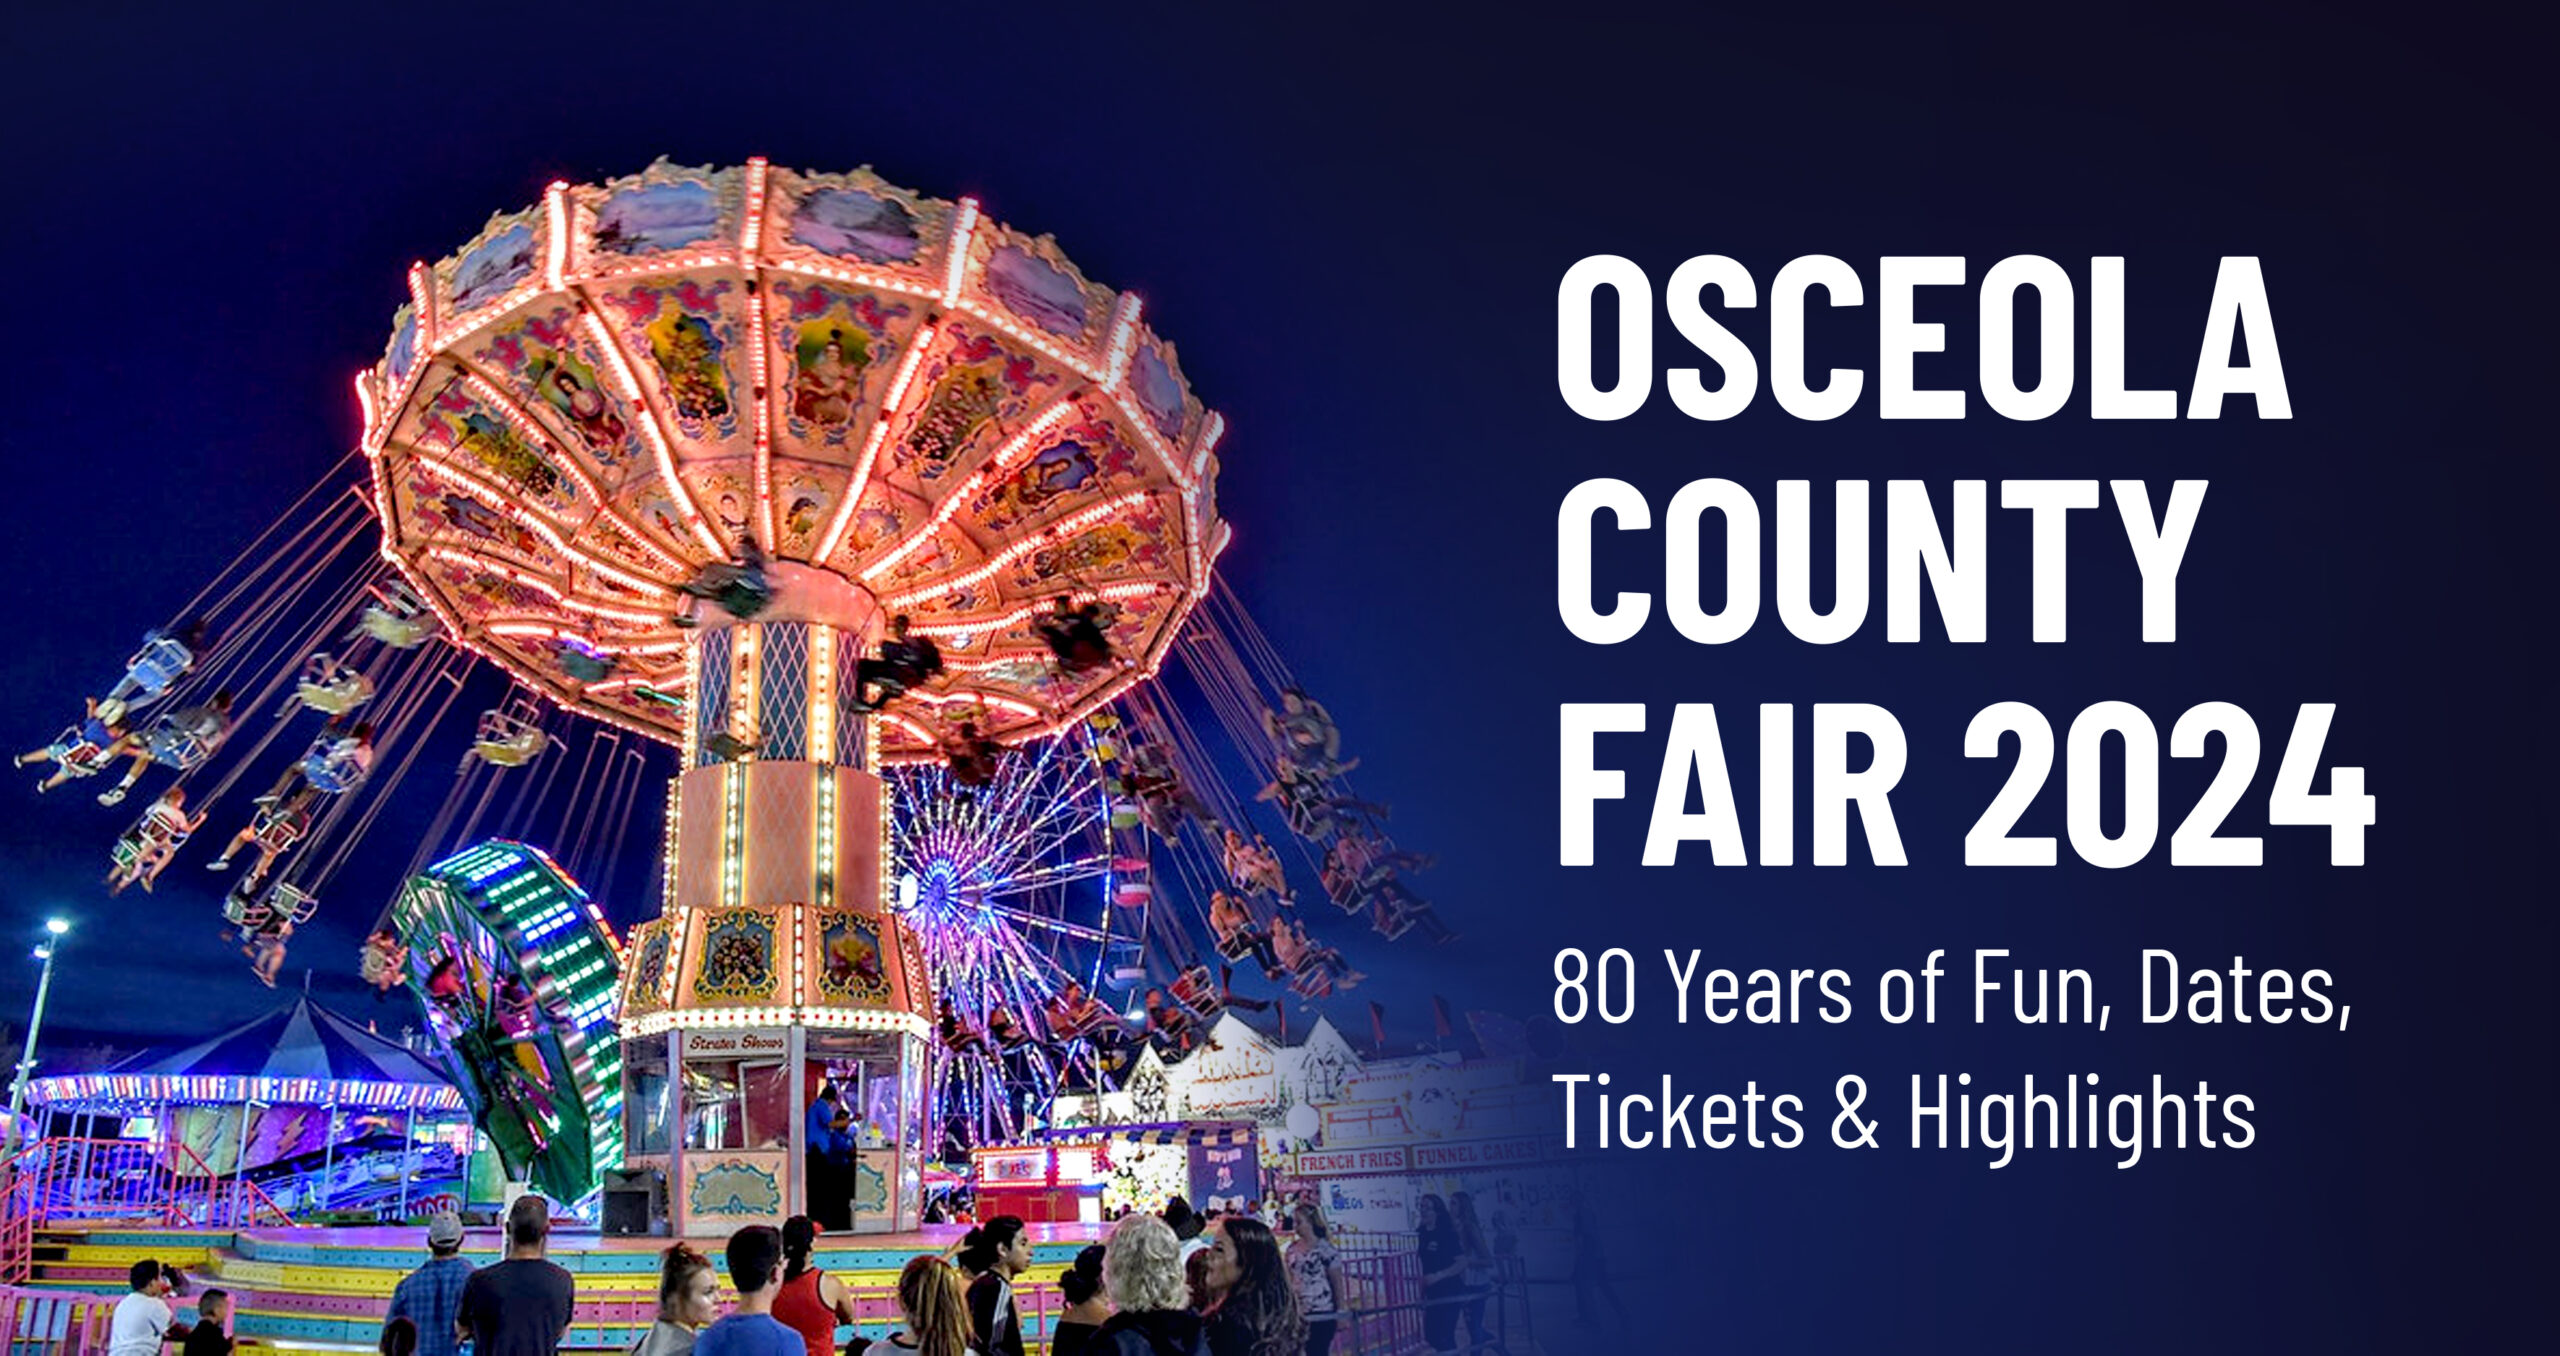 Osceola County Fair 2024: 80 Years of Fun, Dates, Tickets, and Highlights